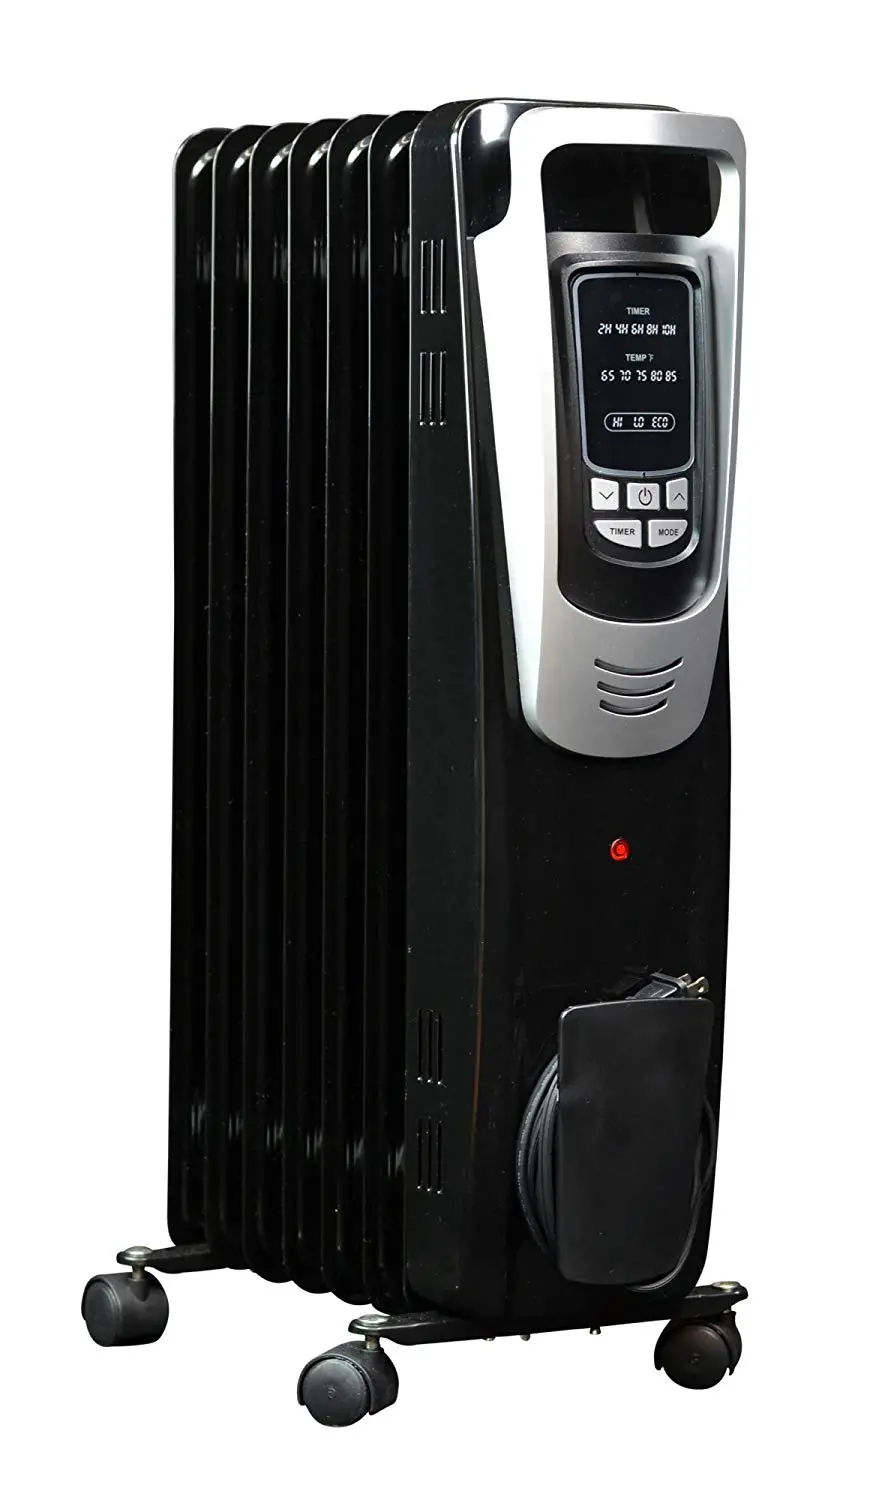 NewAir Electric Oil-Filled Space Heater for a grow room